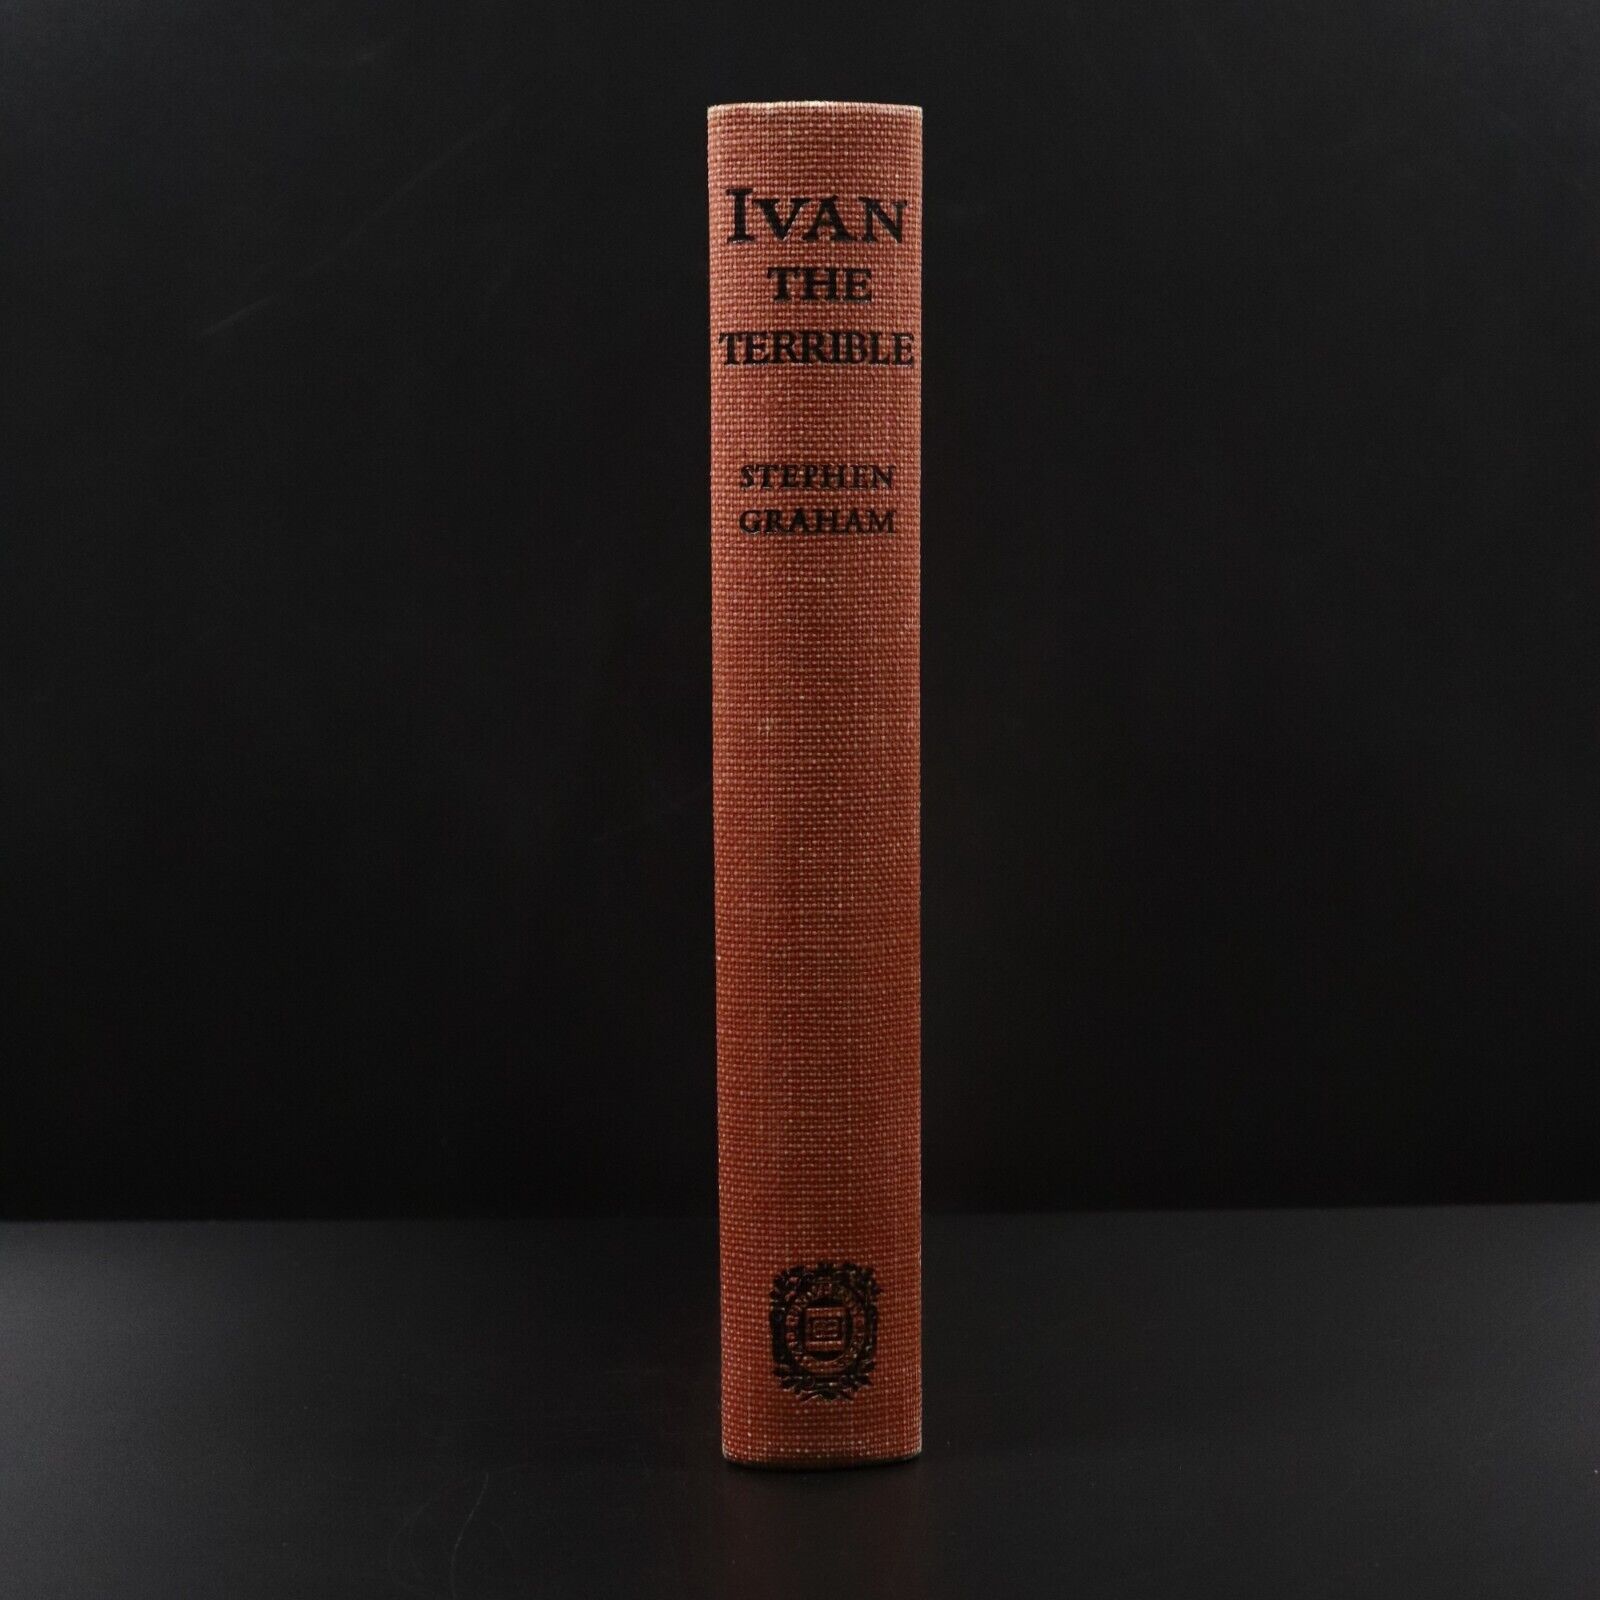 1934 Ivan The Terrible Life Of Ivan IV Of Russia Antique Russian History Book